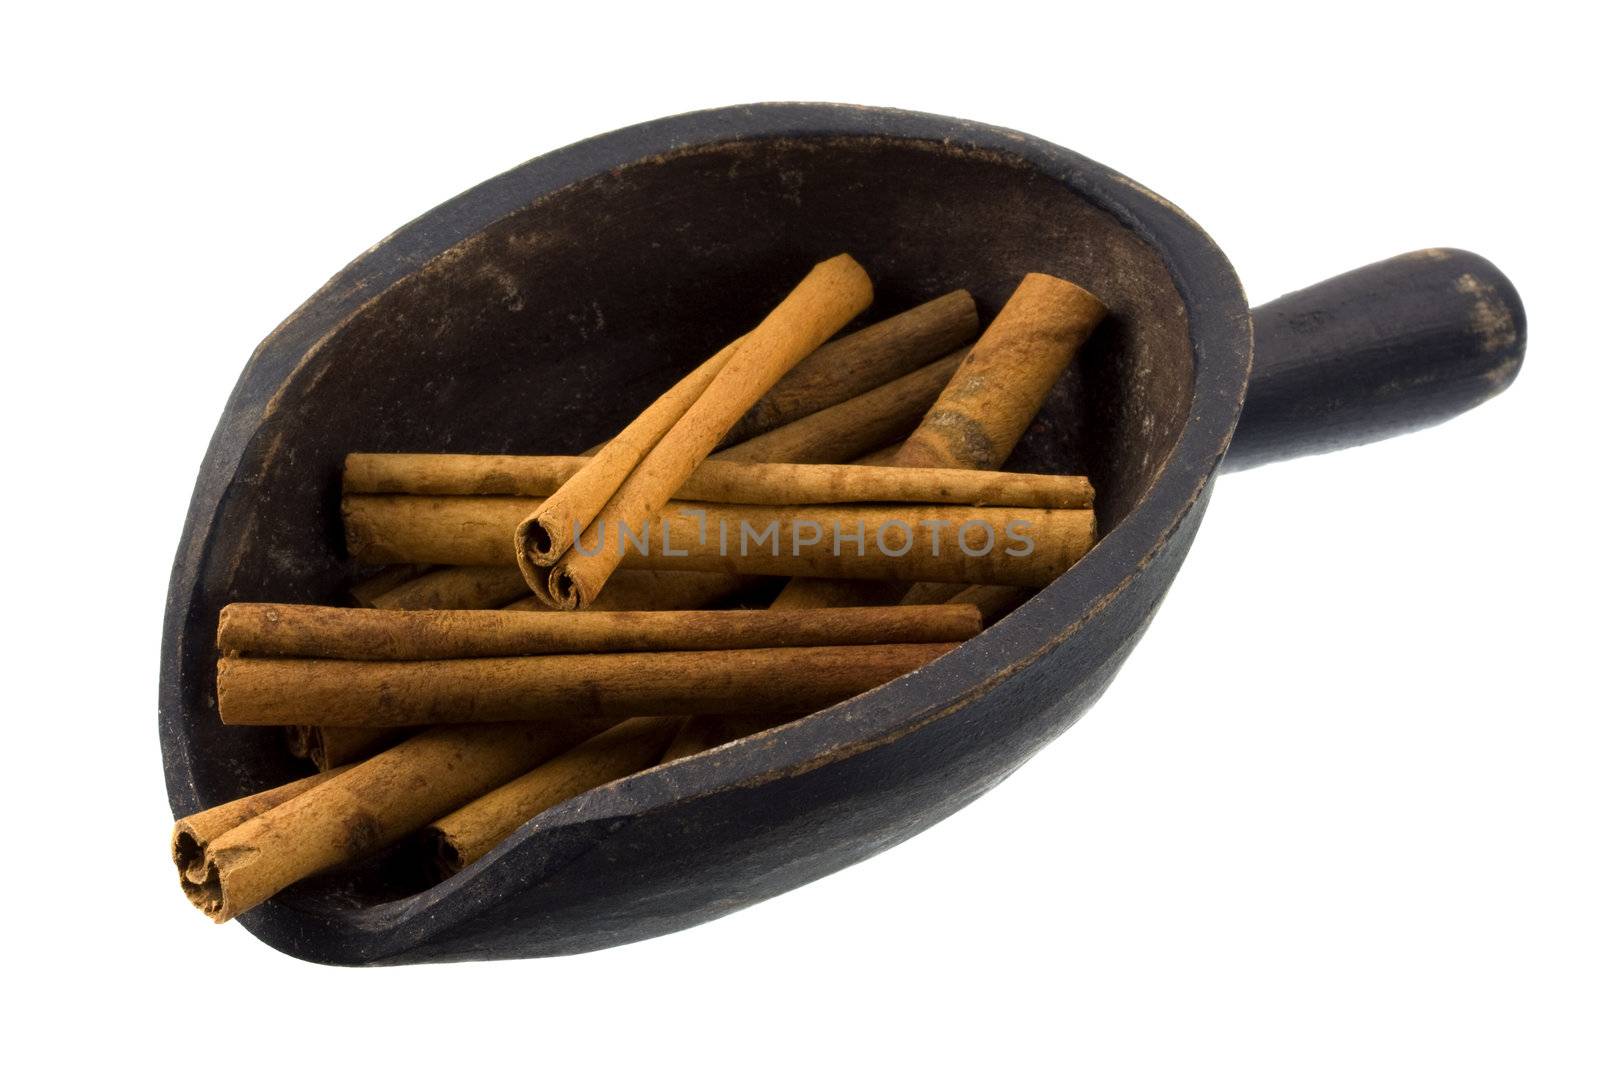 cinammon sticks on a rustic, wooden scoop, isolated on white